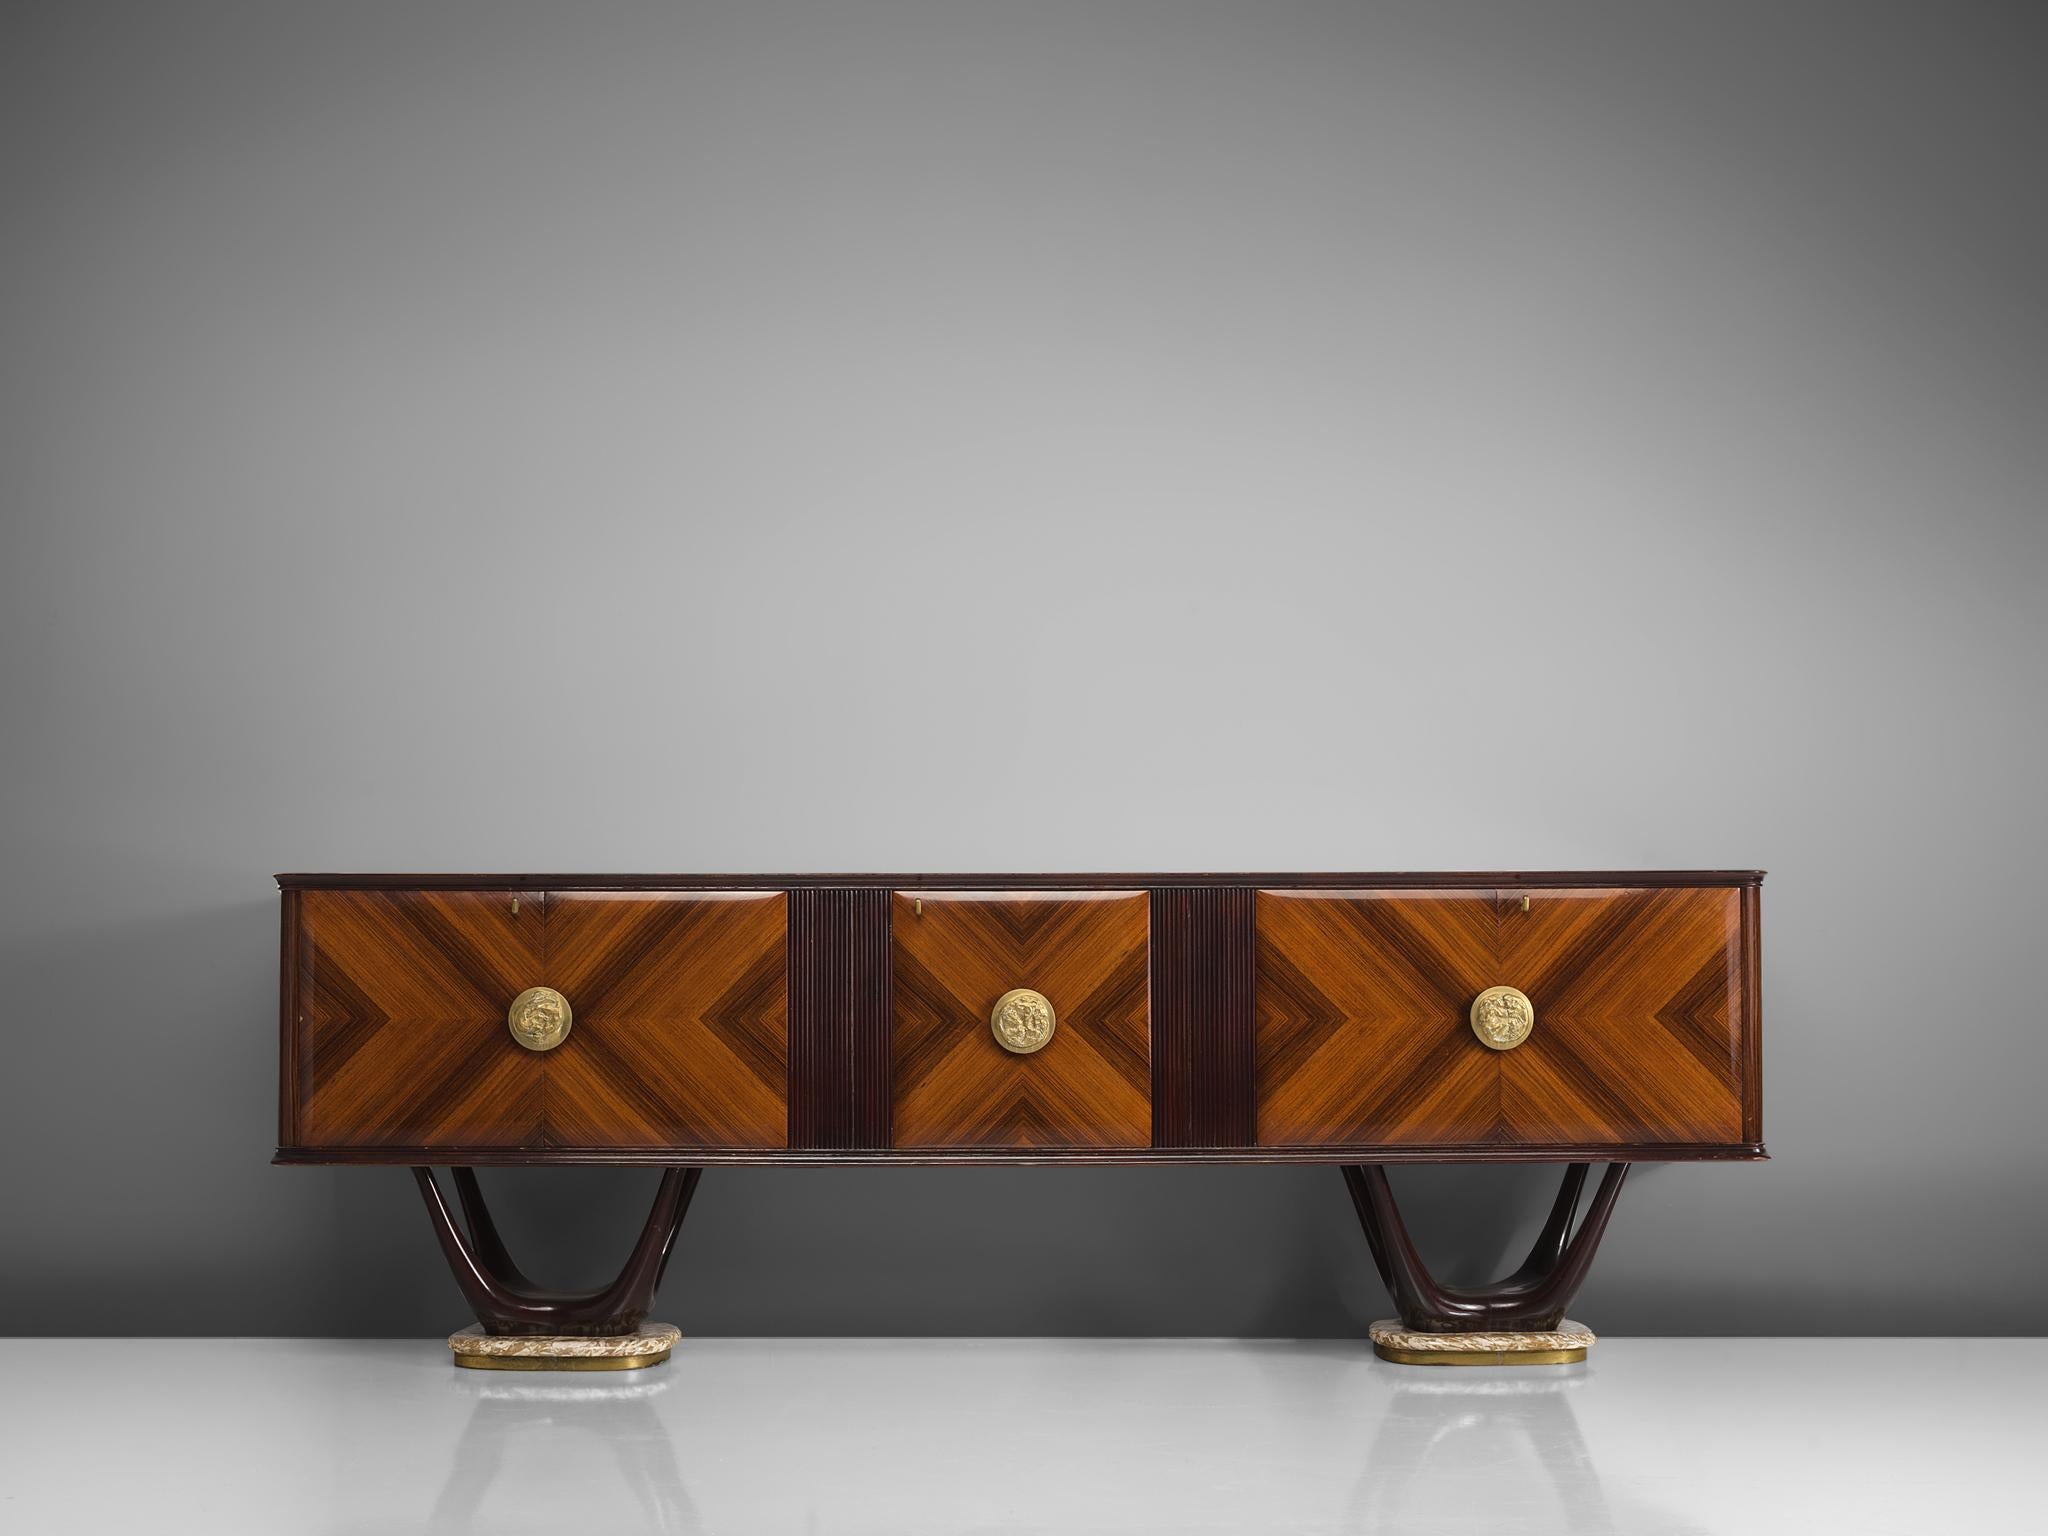 Fratelli Turri, credenza, in mahogany, maple, marble, glass and brass, Italy, 1950s.

This theatrical credenza is designed in the style of Vittorio Dassi. The cabinet itself is made of a mahogany construction. The doors are made of mahogany veneer,